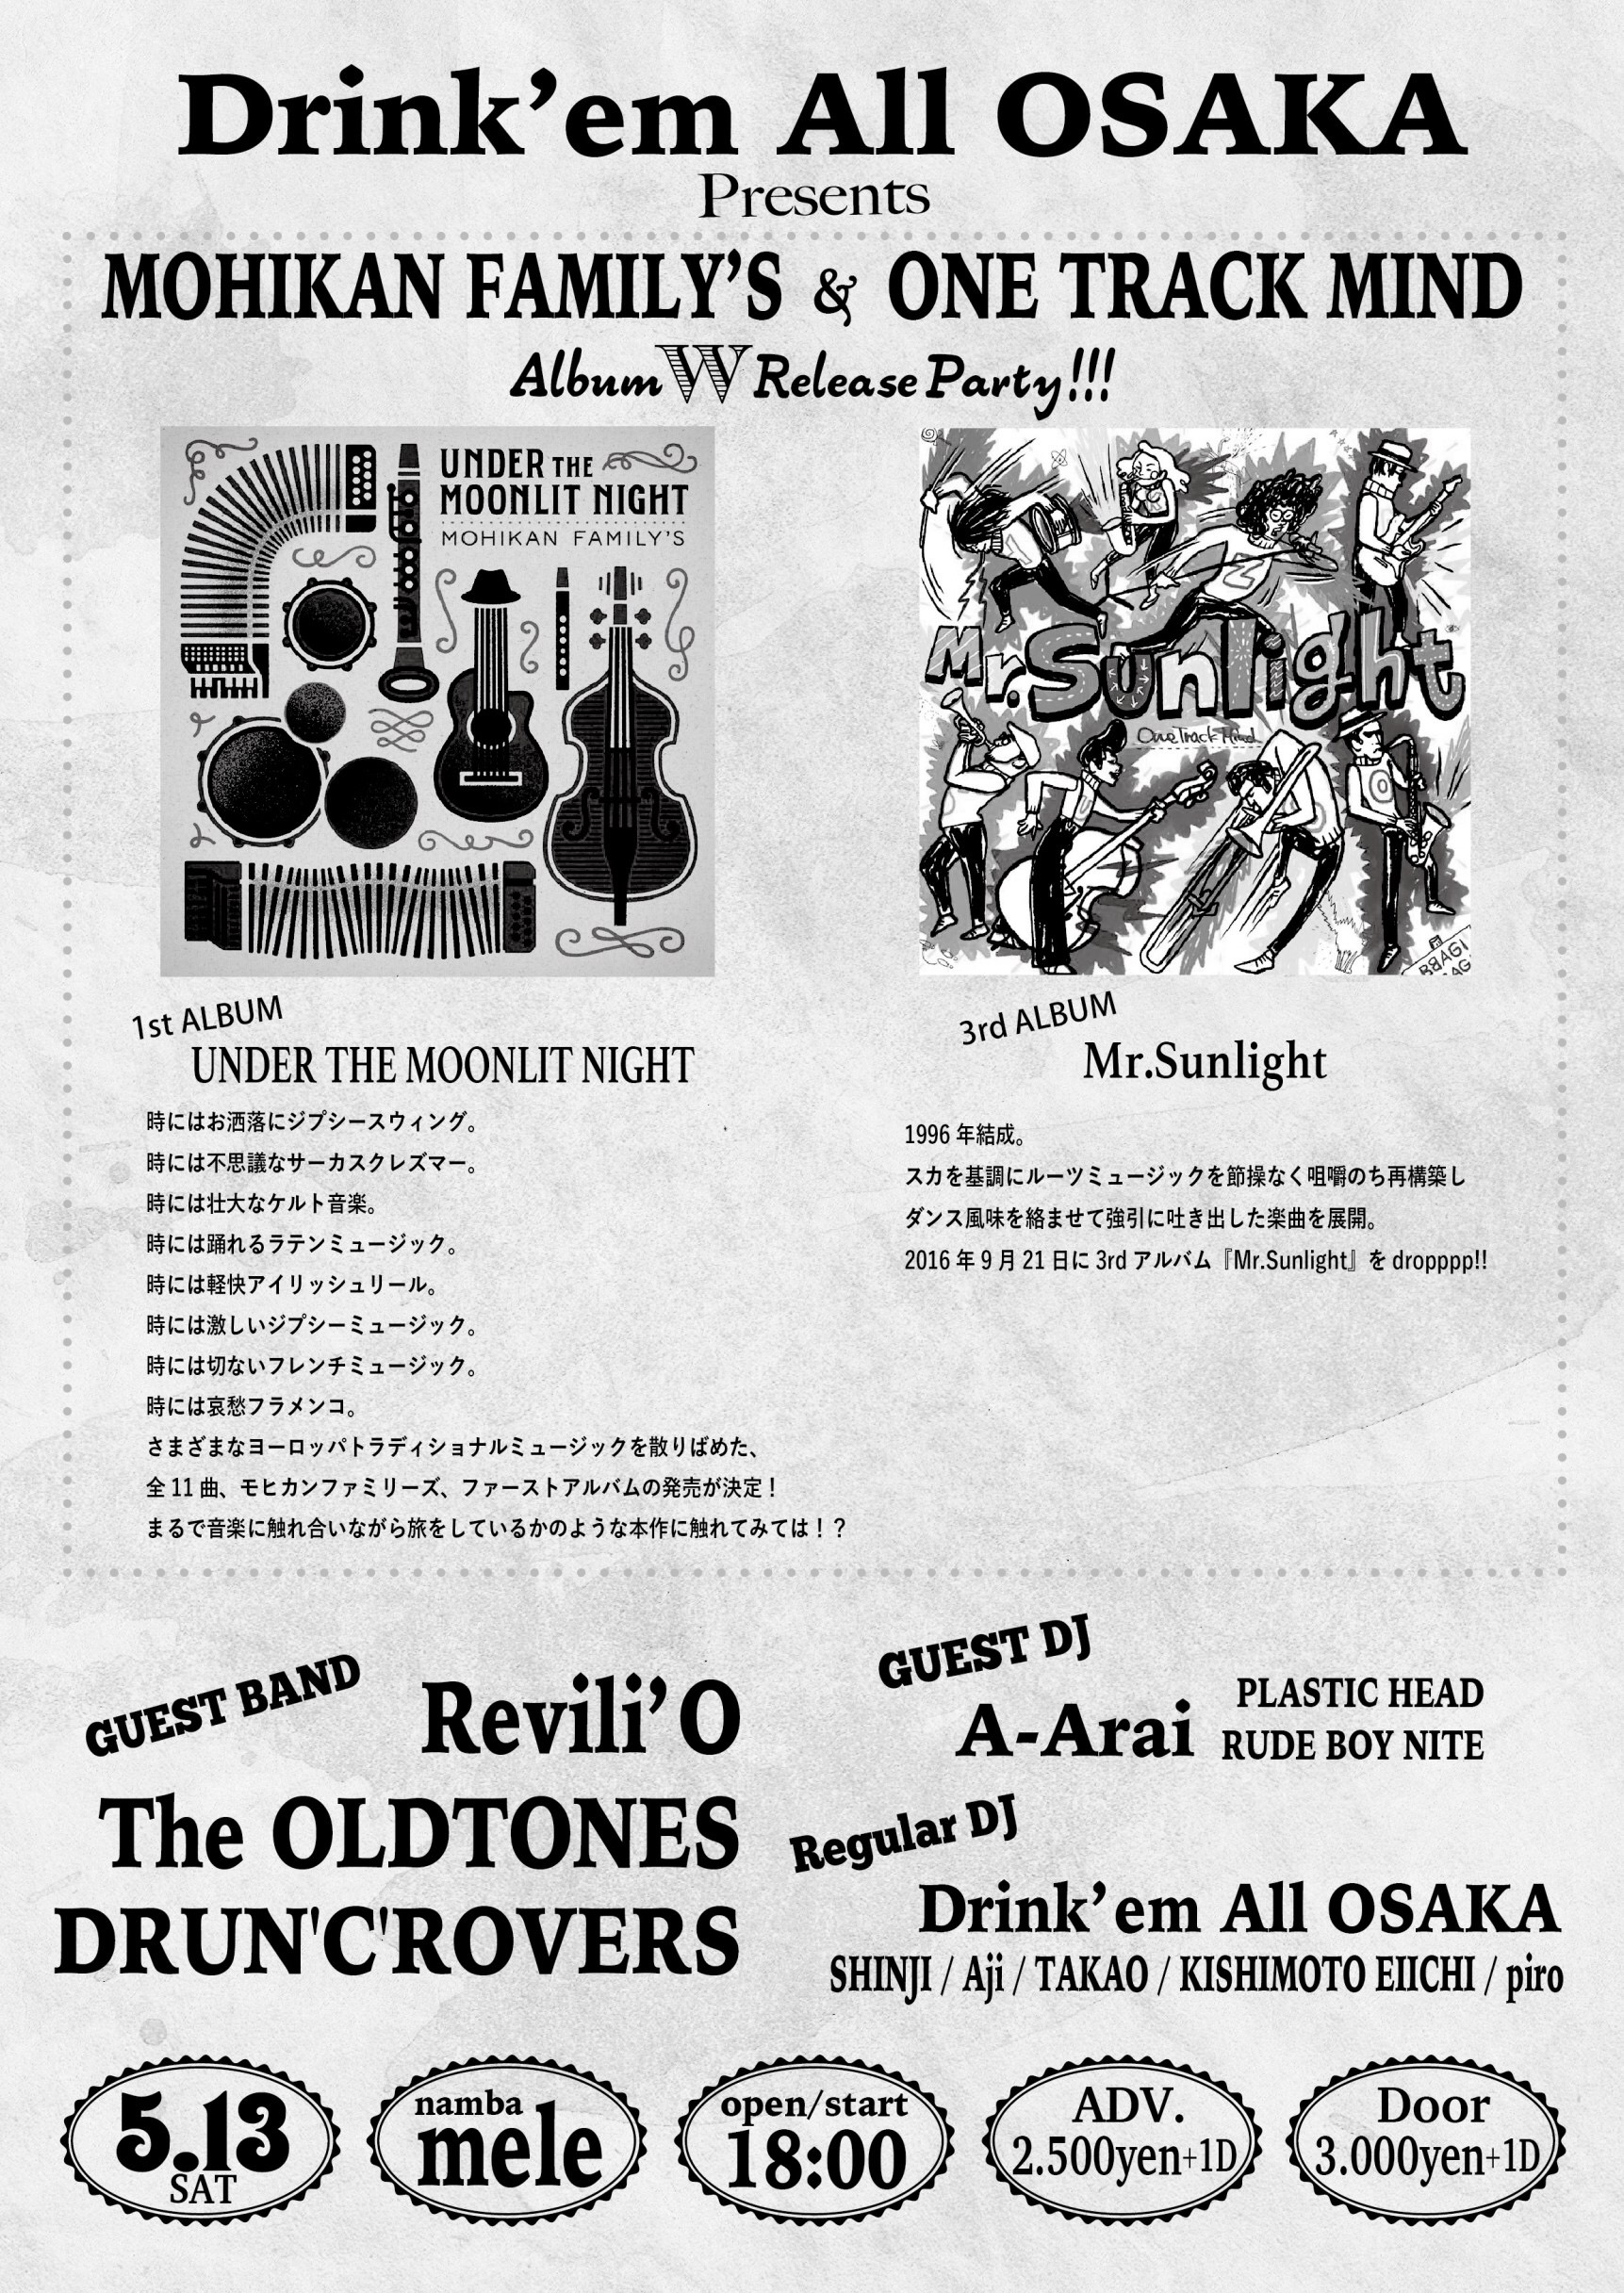 Drink'em All OSAKA Presents MOHIKAN FAMILY'S x ONE TRACK MIND Album Release Party